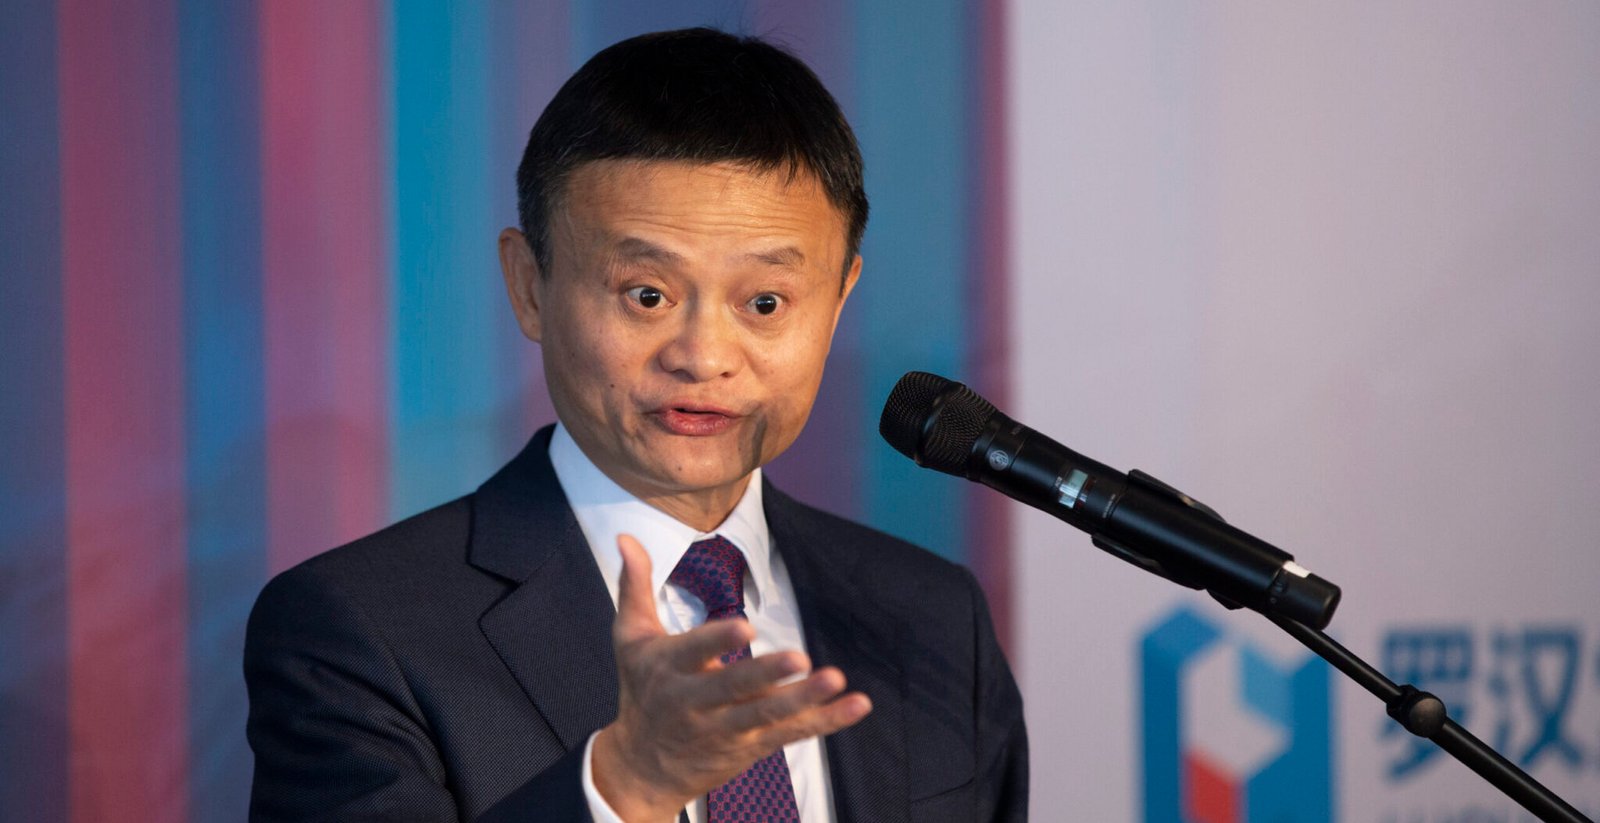 Alibaba co-founder and chairman Jack Ma